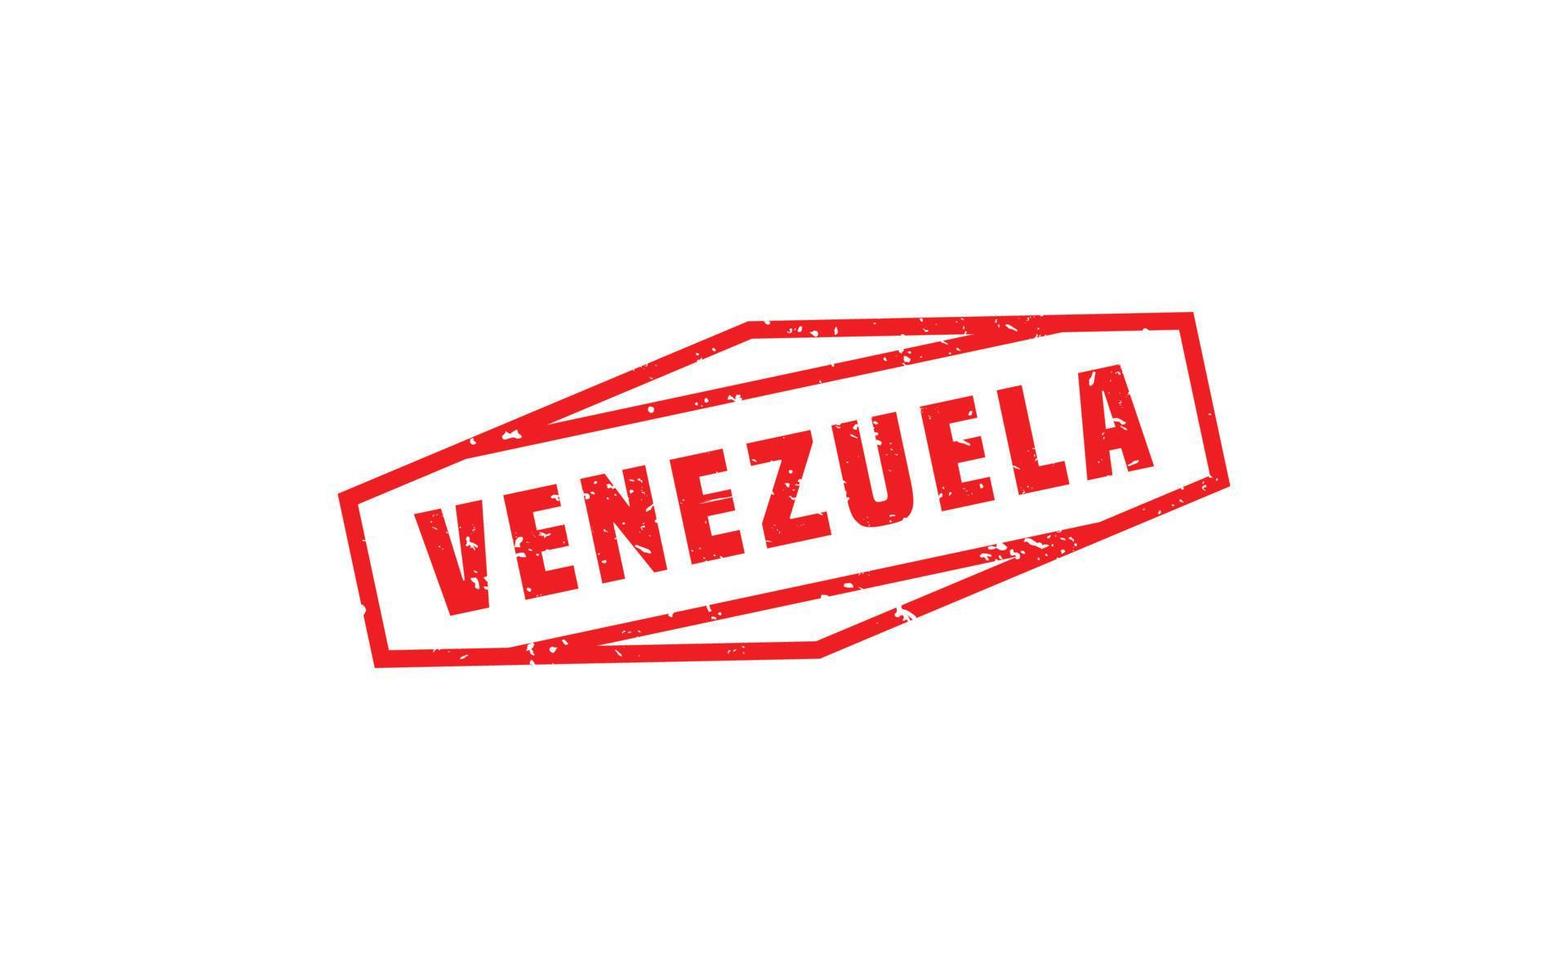 VENEZUELA stamp rubber with grunge style on white background vector